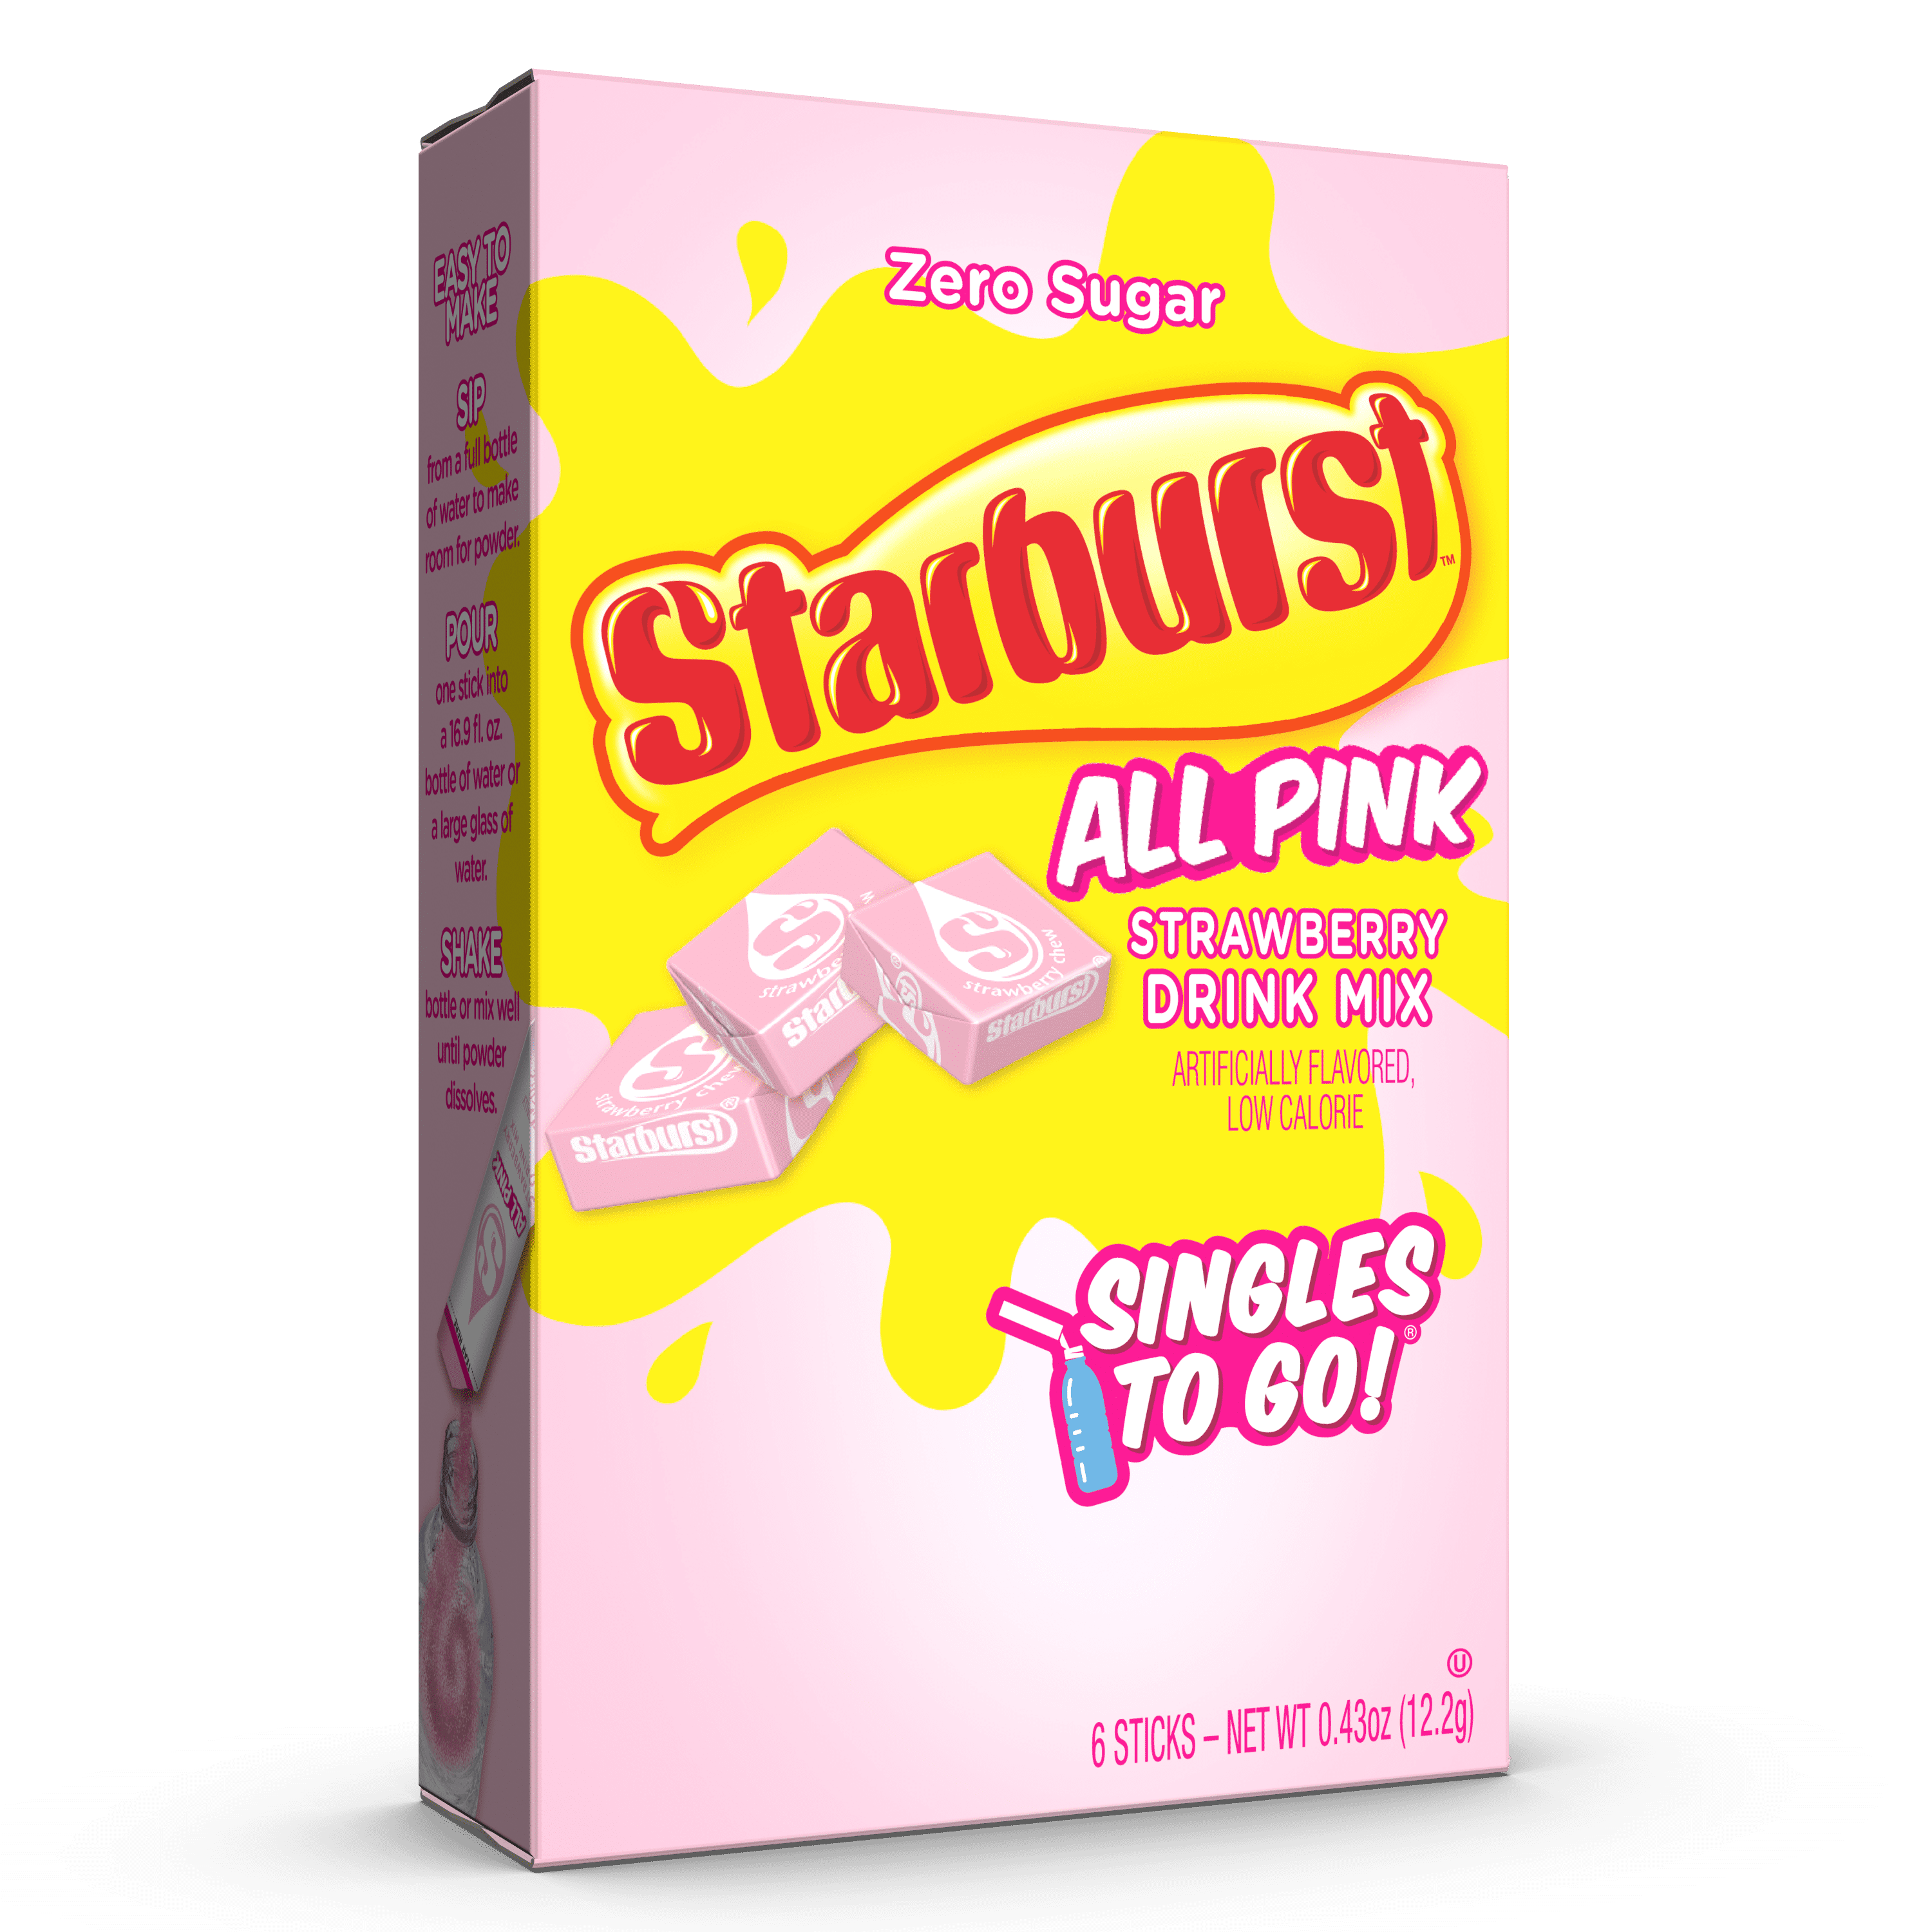 Starburst Zero Sugar Singles-To-Go Powdered Drink Mix, All Pink Strawberry, 6 Count Packets